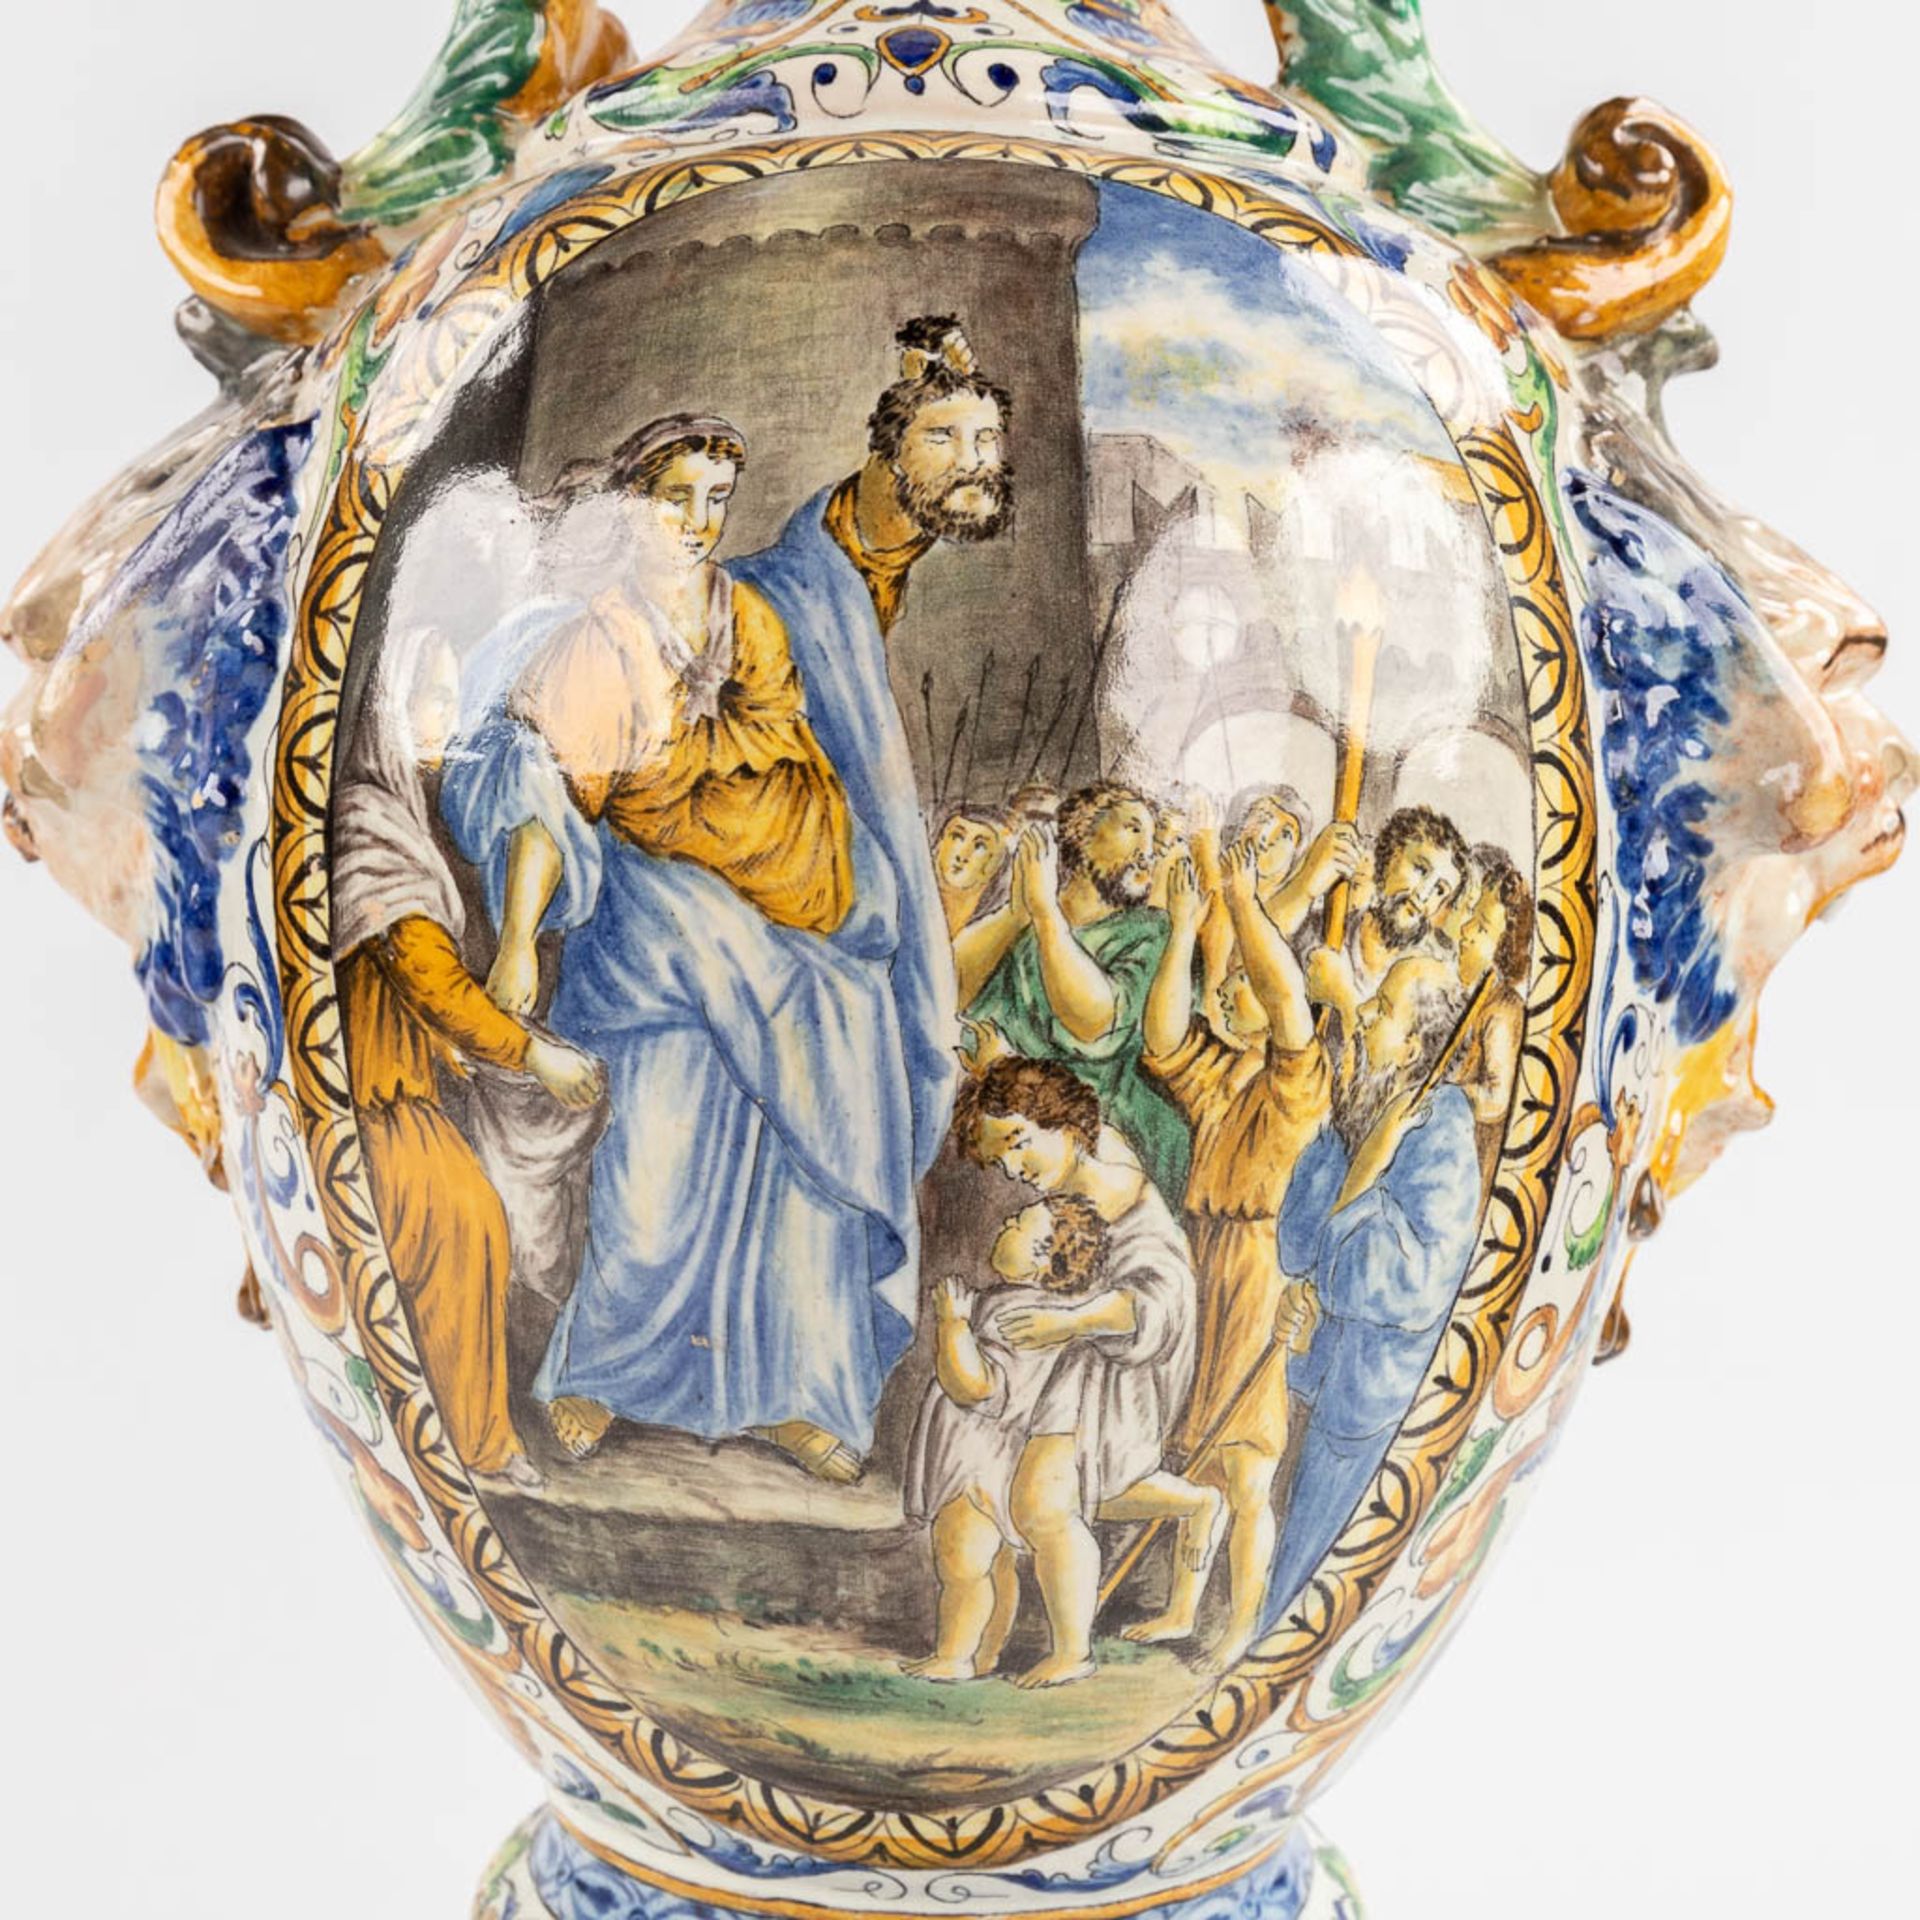 A pair of large vases, Italian Renaissance style, glazed faience. 20th C. (D:45 x W:45 x H:205 cm) - Image 20 of 31